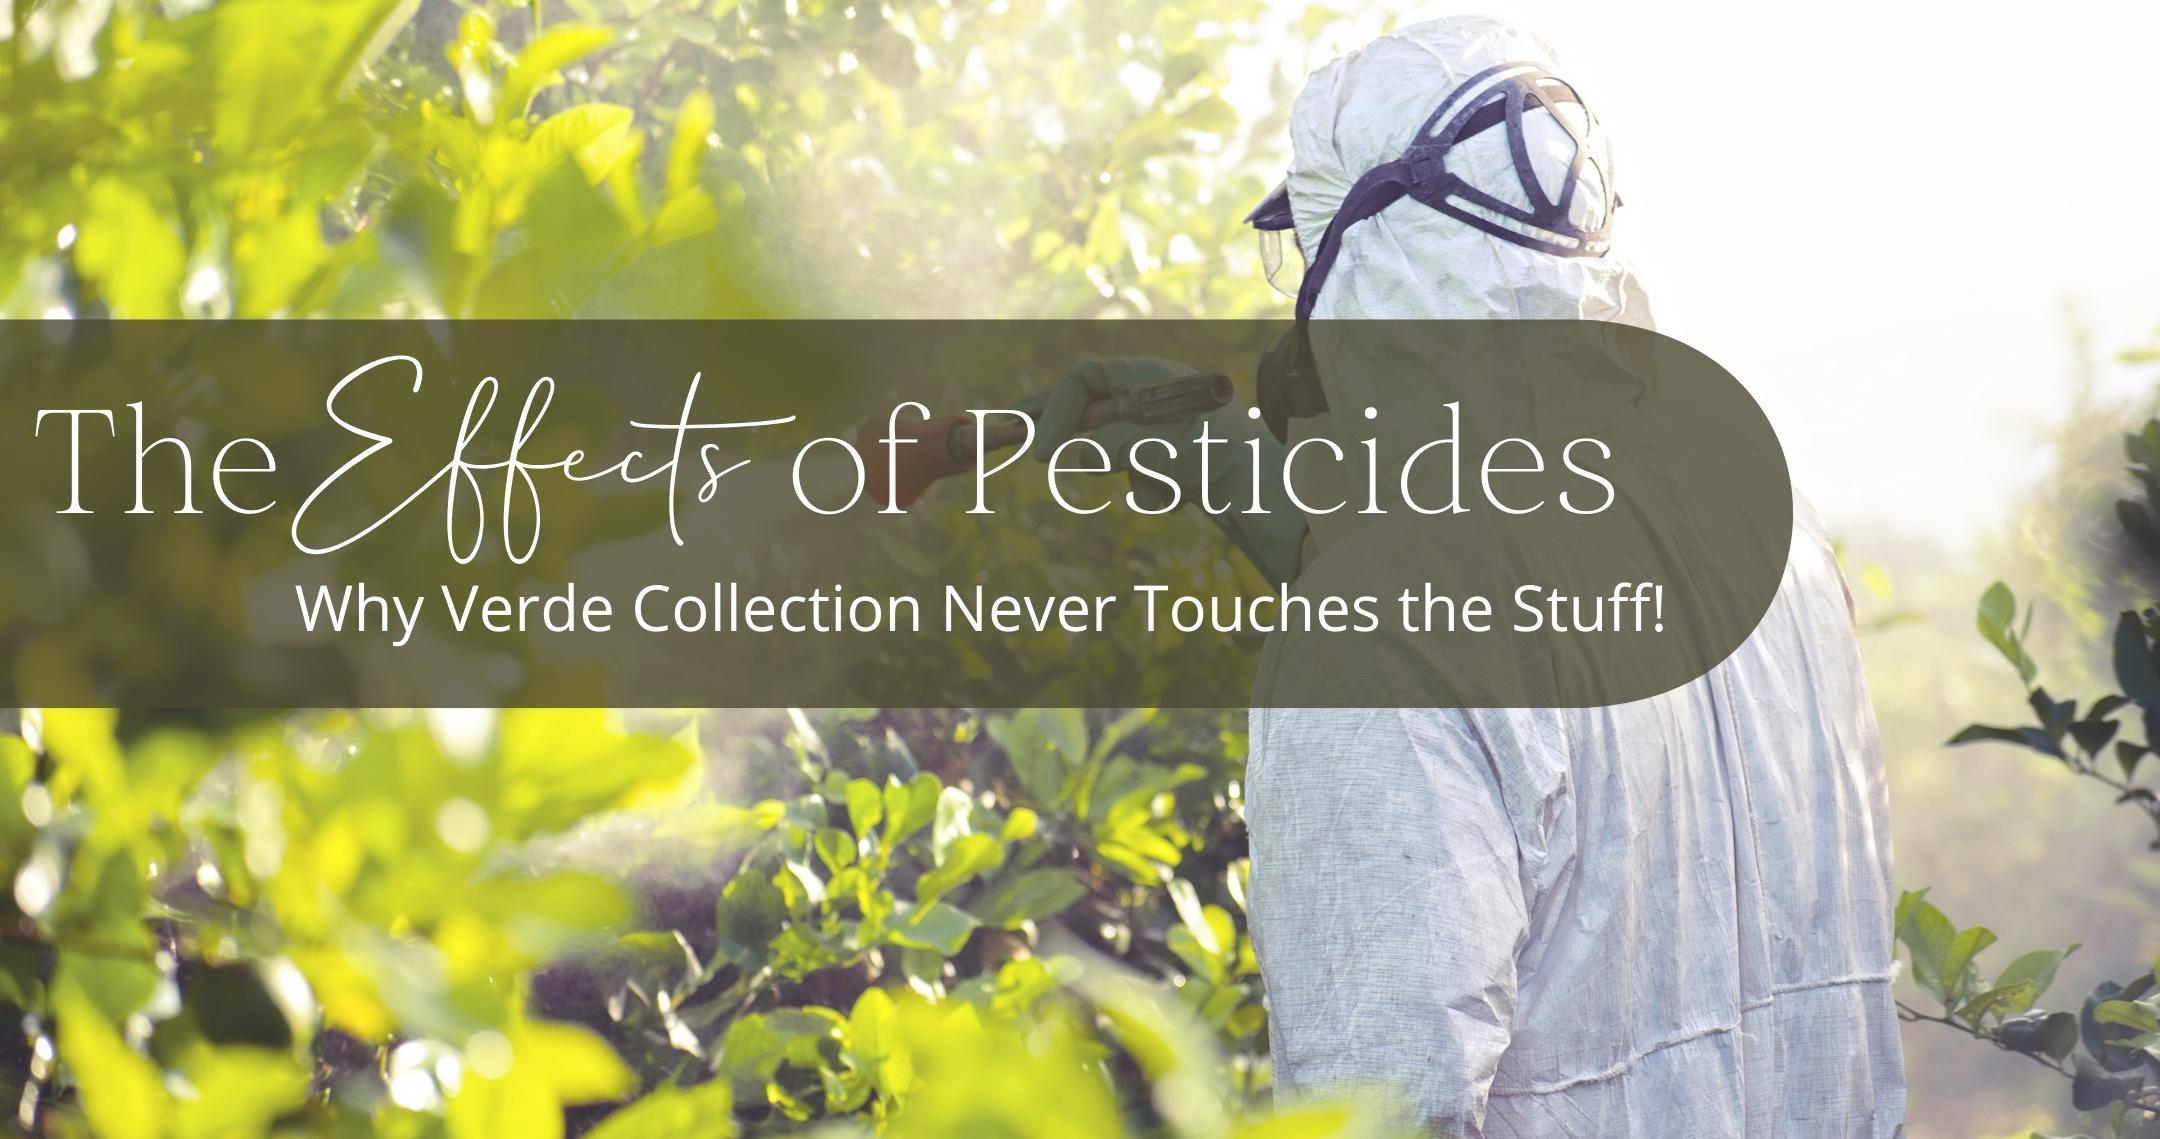 The Effects of Pesticides on Your Health